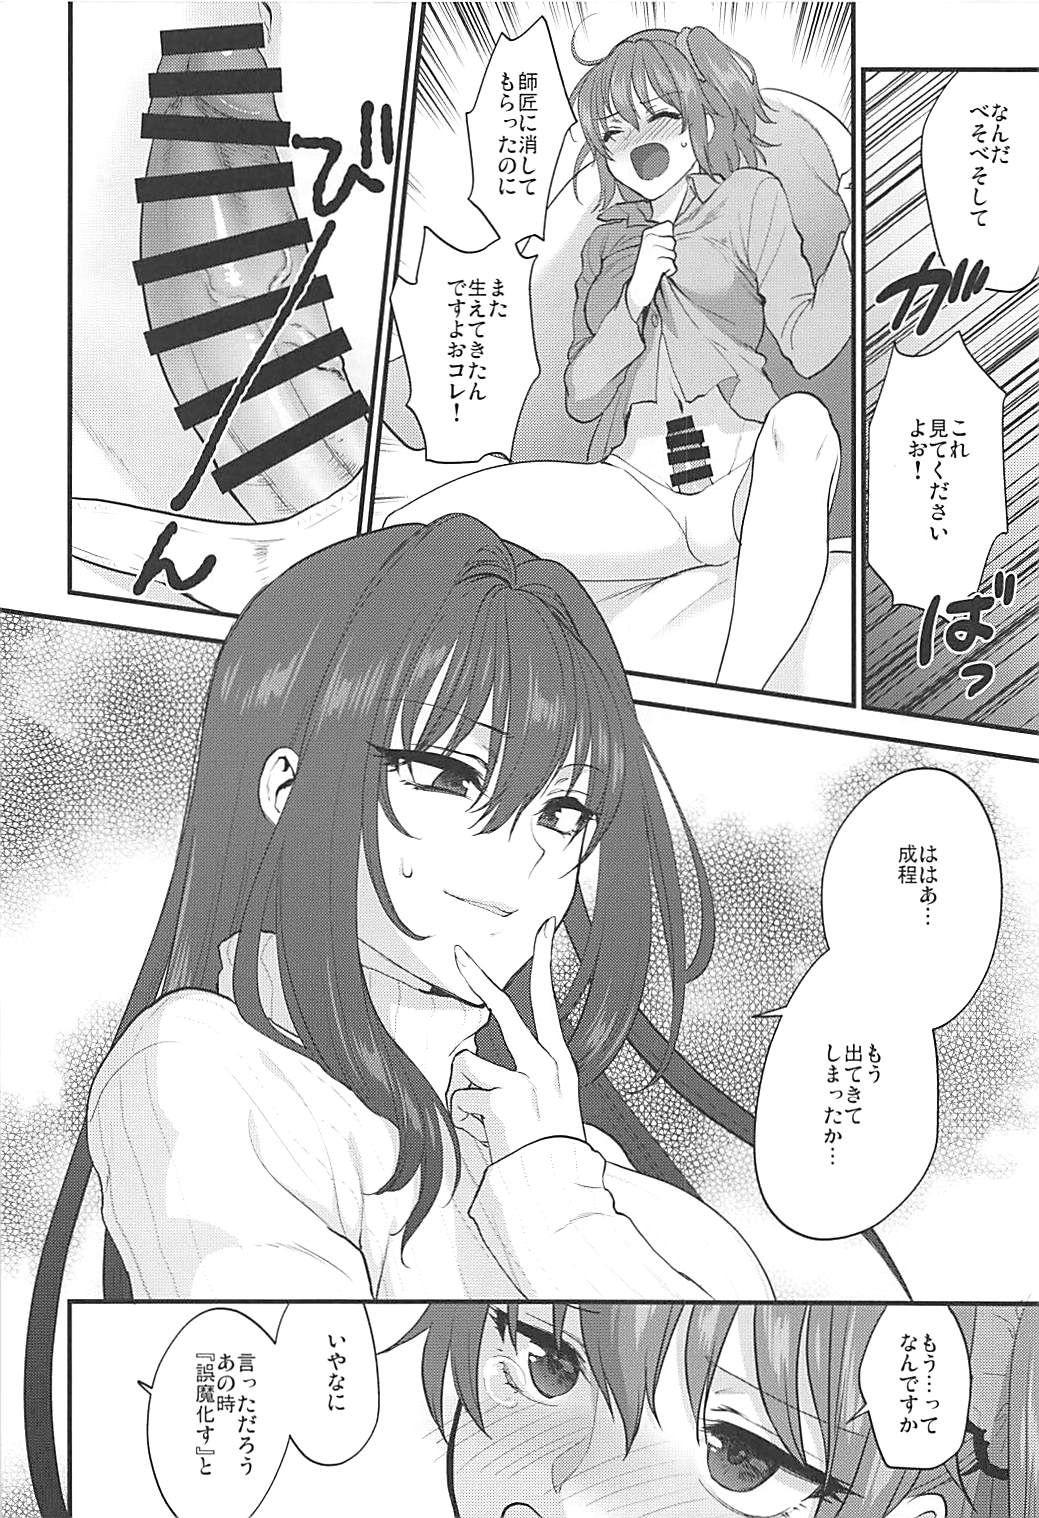 Double Blowjob In my room. - Fate grand order Romantic - Page 5